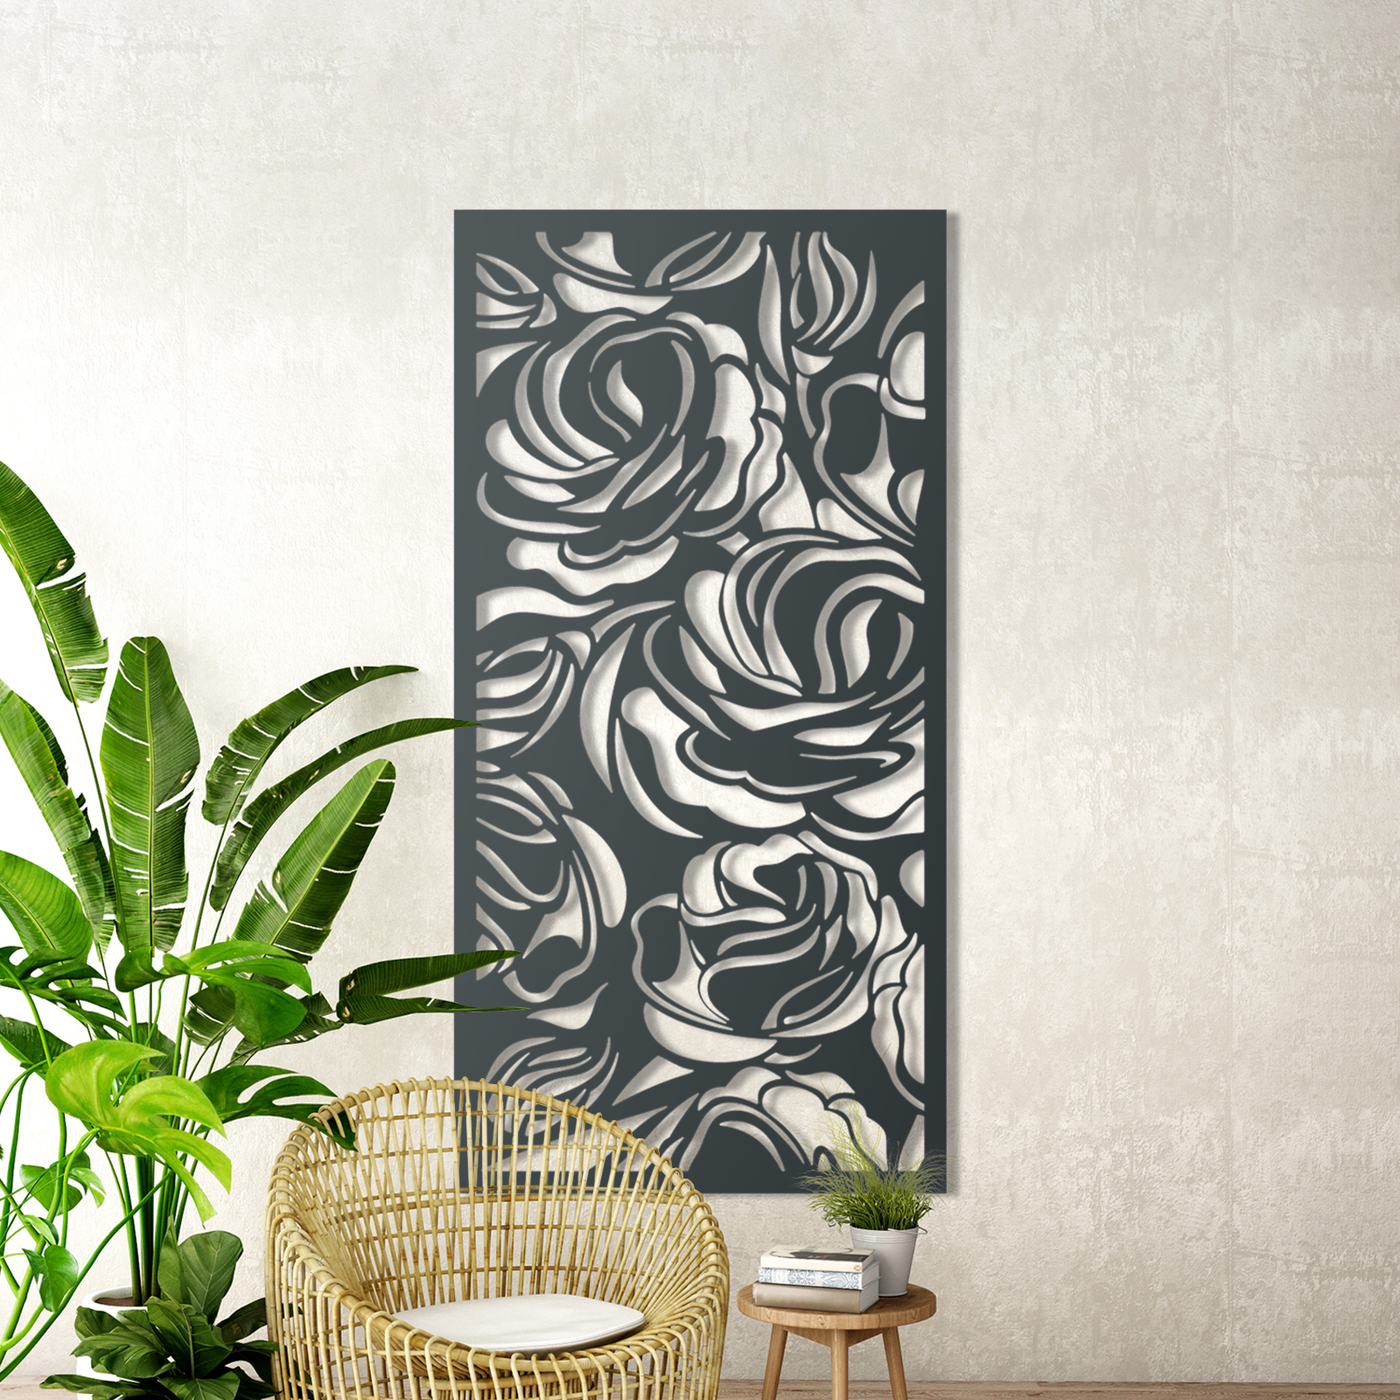 Roses Metal Garden Screen: Durable, Stylish, and Functional